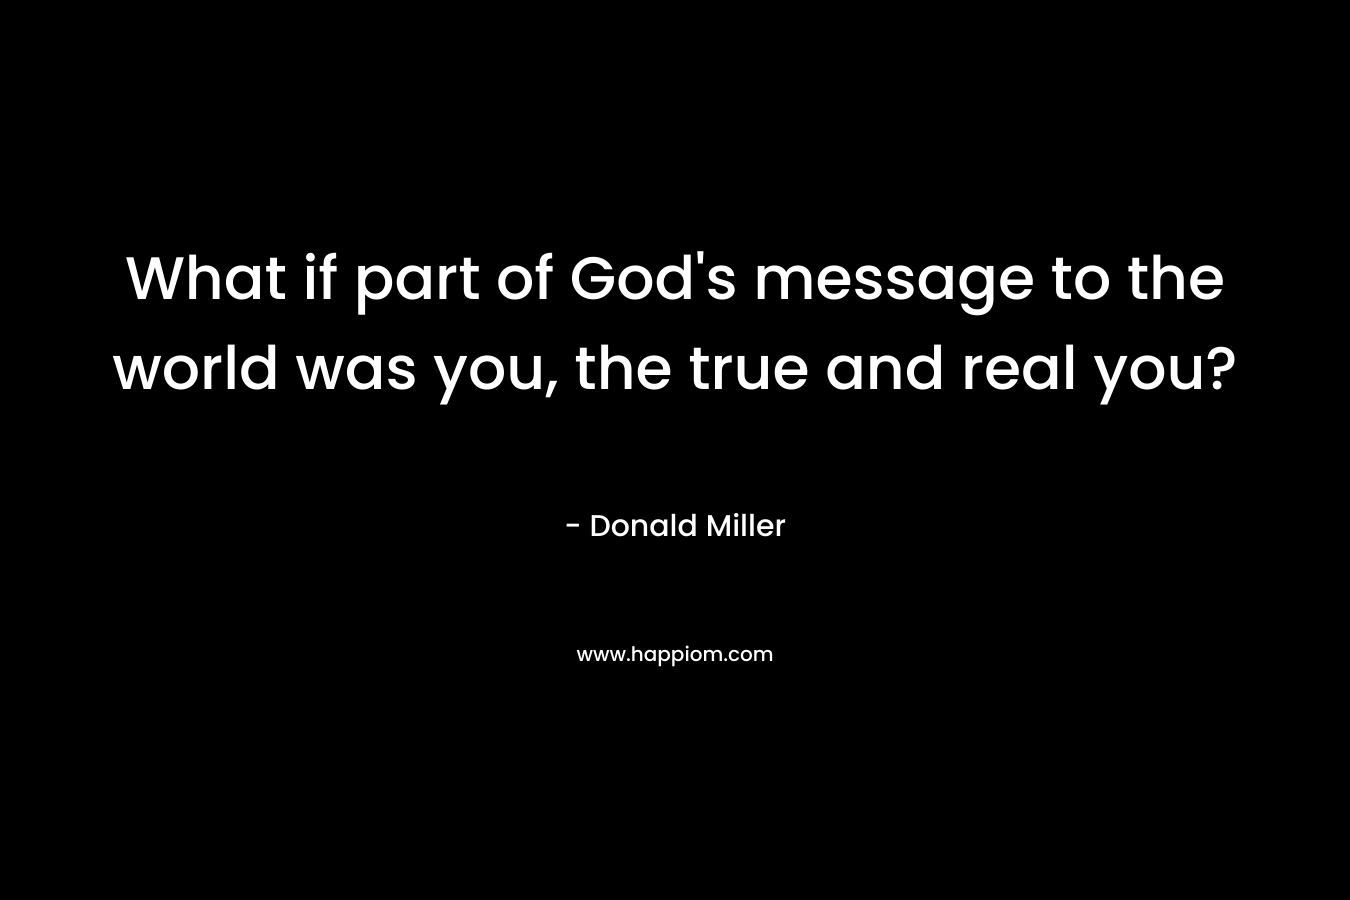 What if part of God’s message to the world was you, the true and real you? – Donald Miller